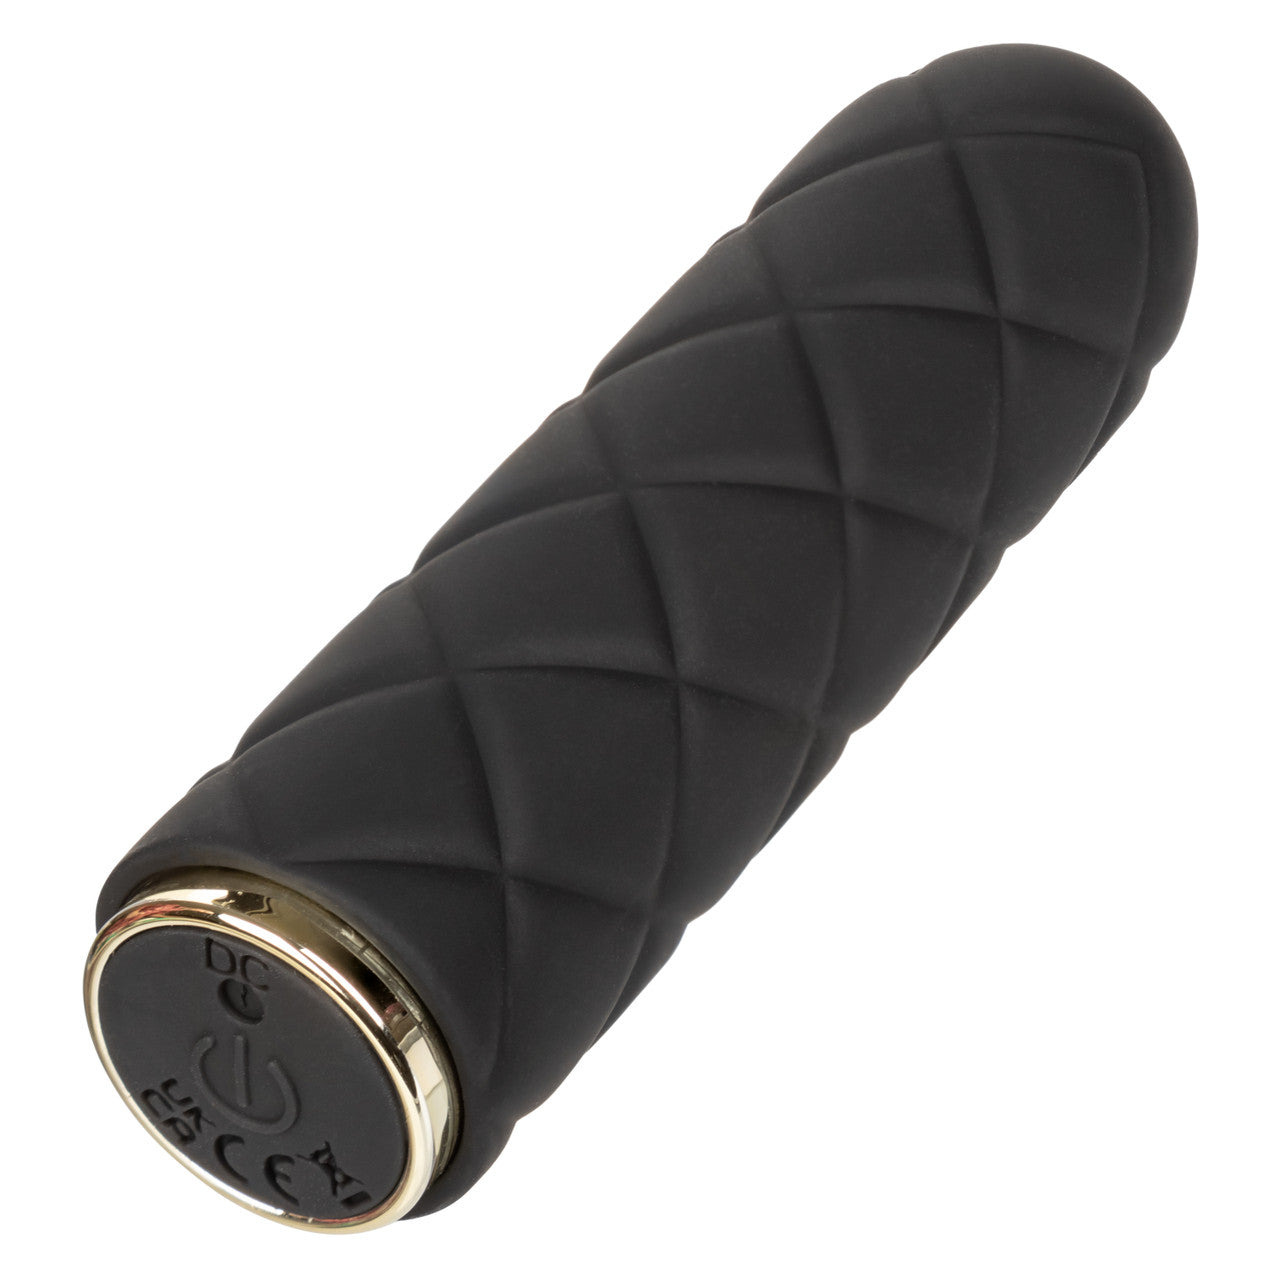 Raven Quilted Seducer Mini Massager